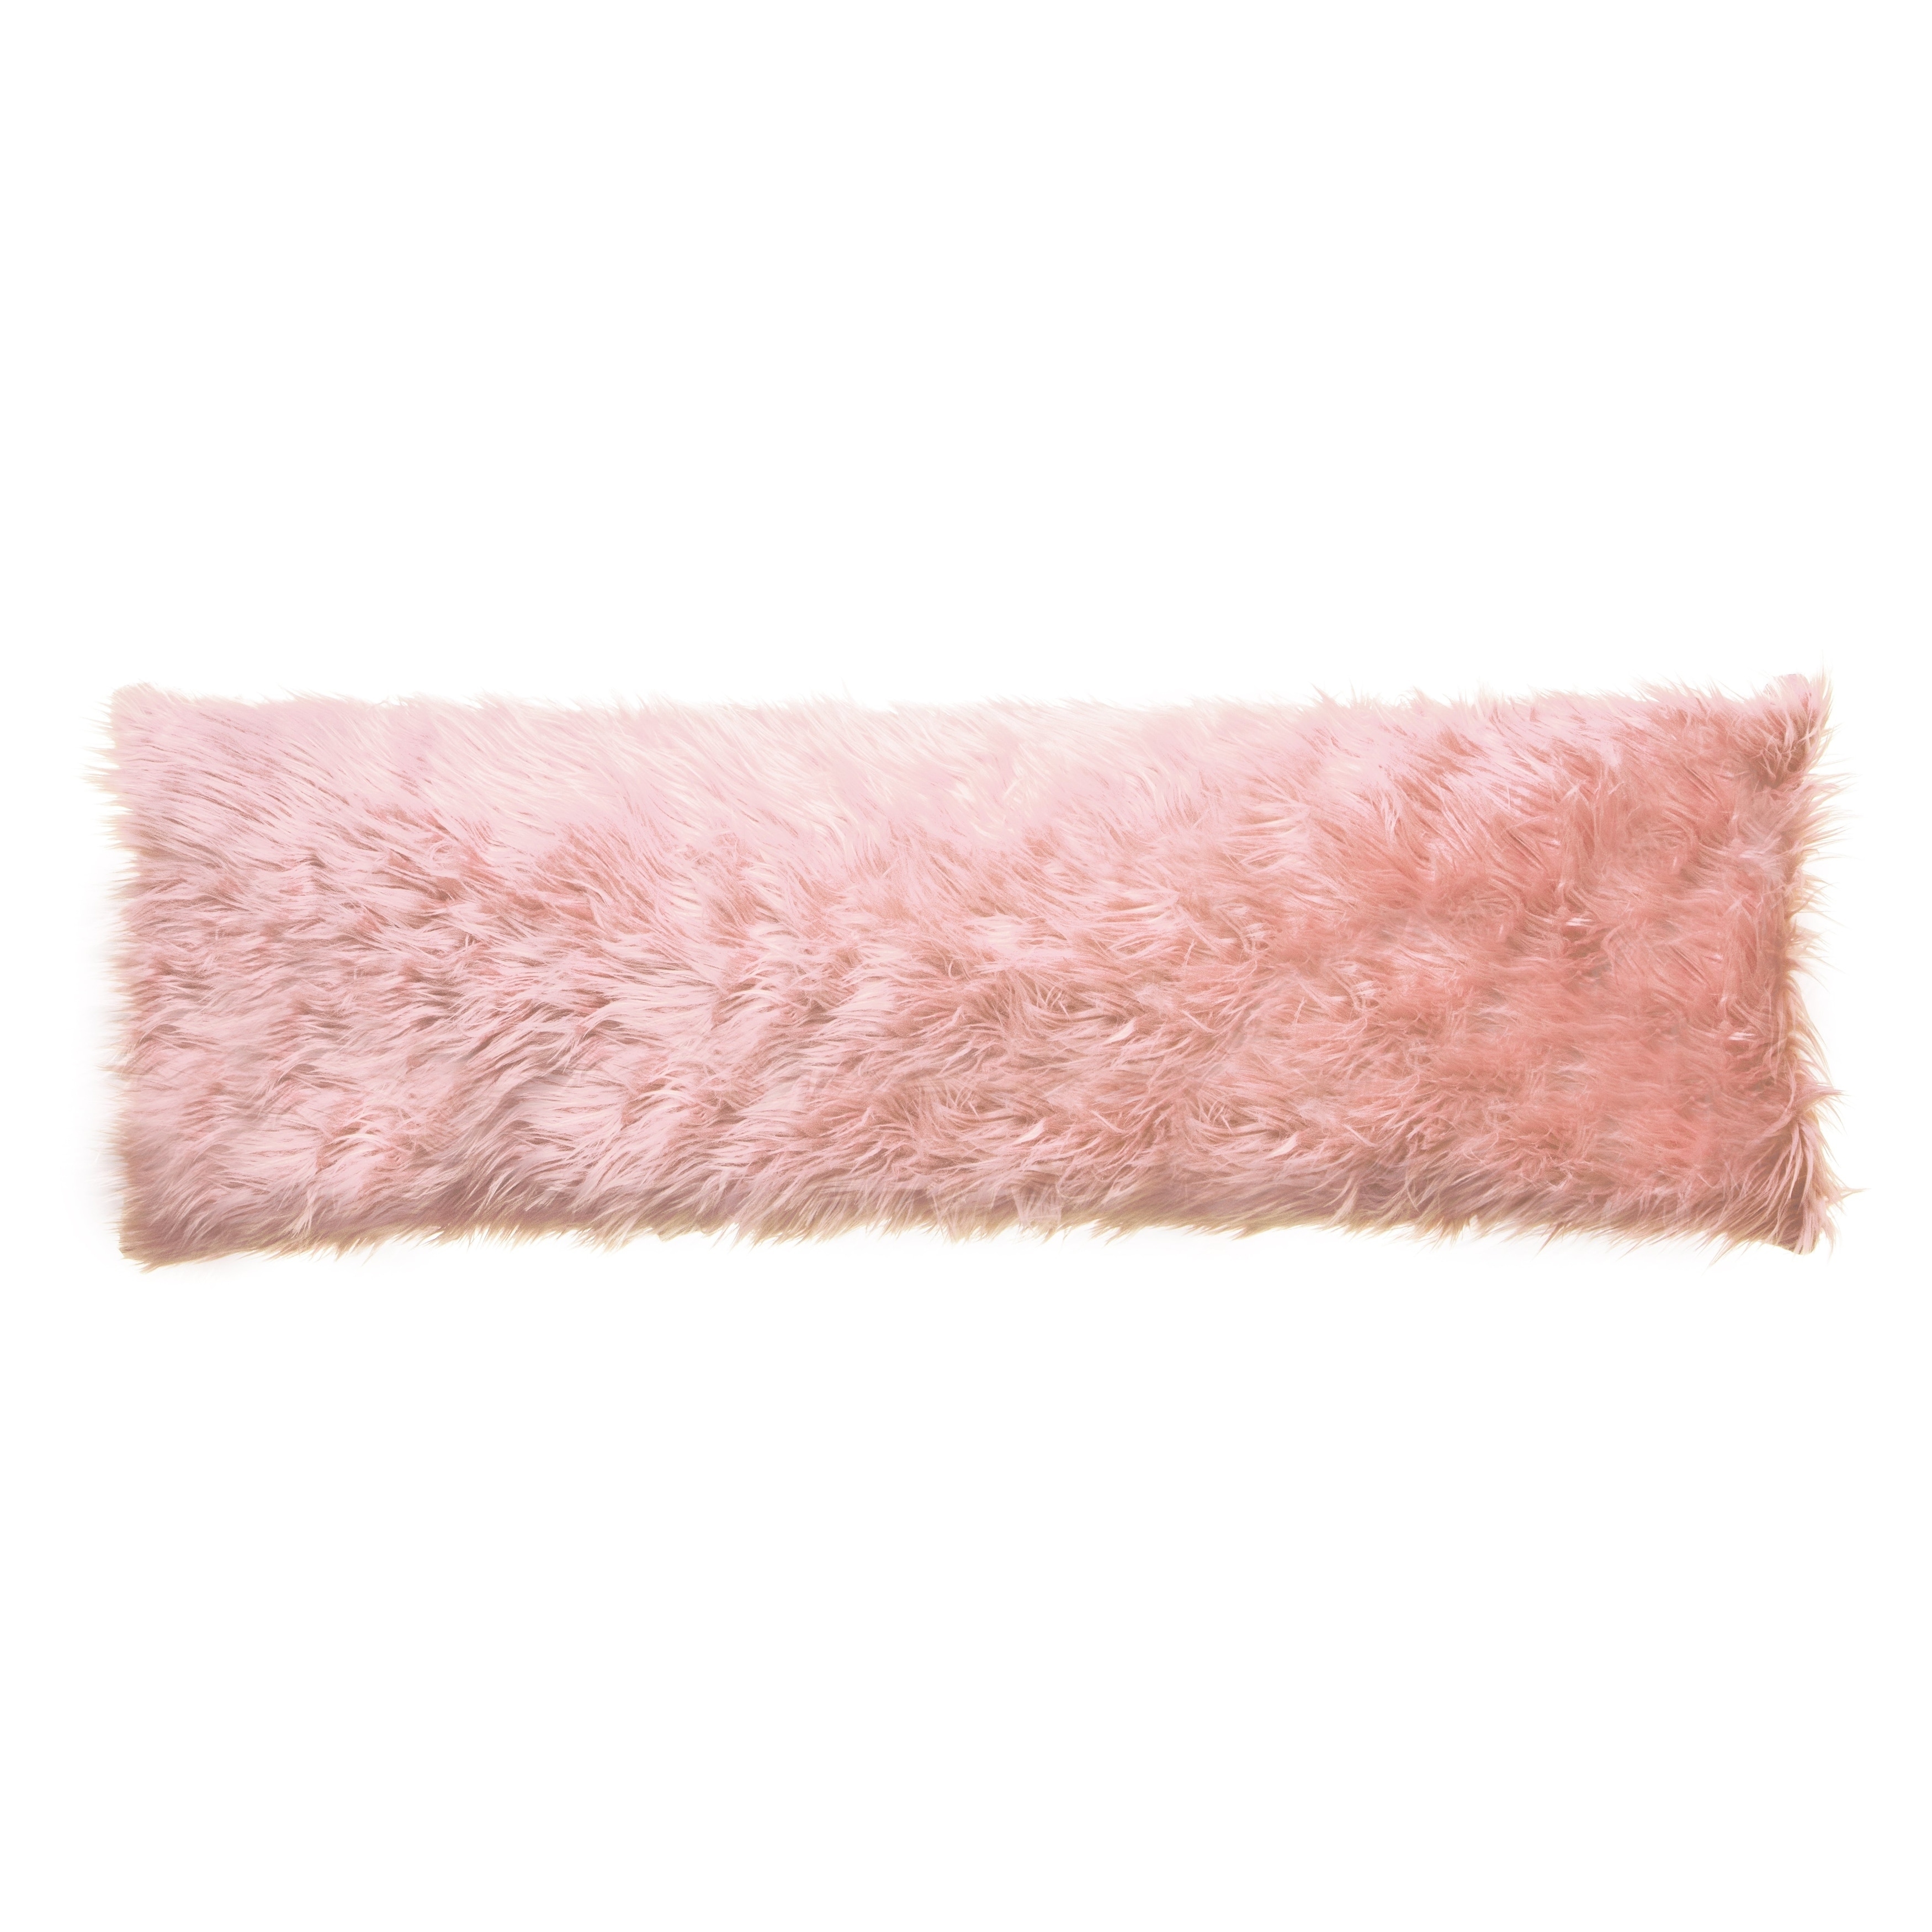 Faux Fur Body Pillow Cover, Mongolian Pink 20x54 (Cover Only 